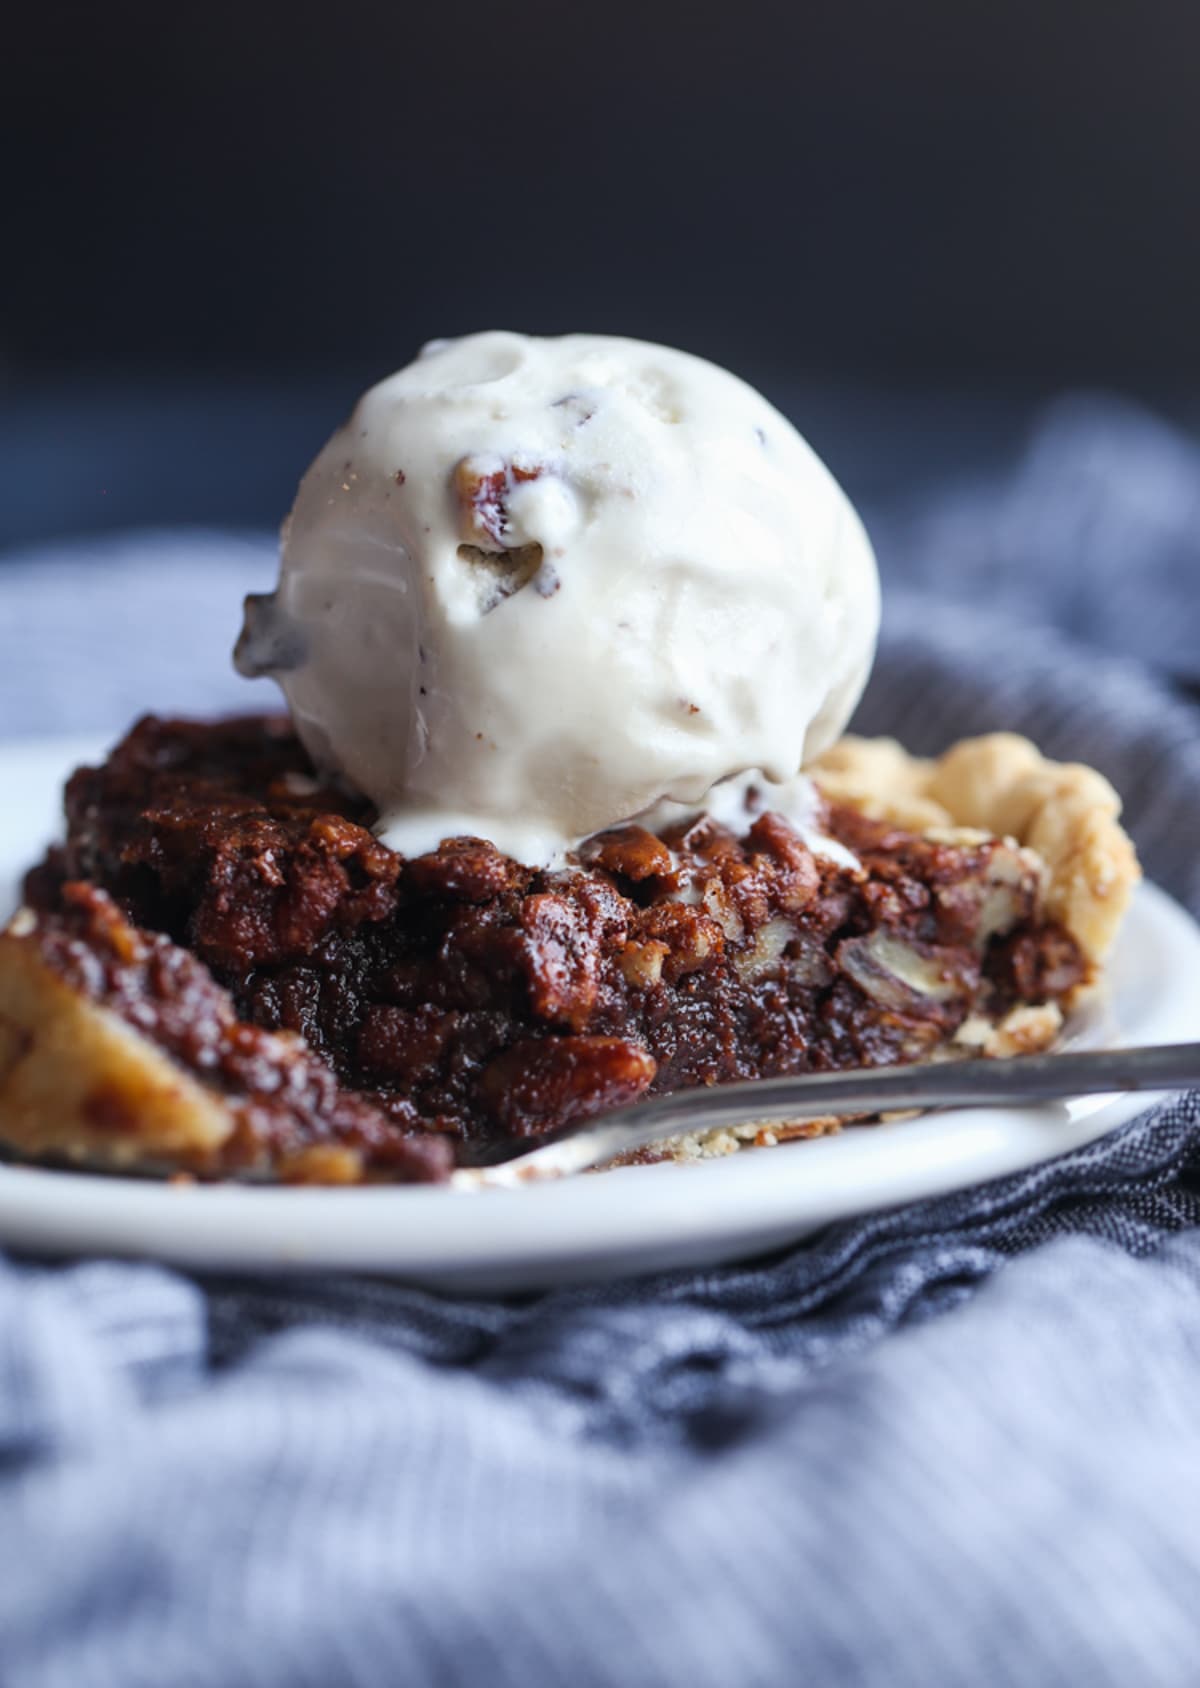 A slice of chocolate pecan pie on a plate topped with vanilla ice cream with a forkful taken out.